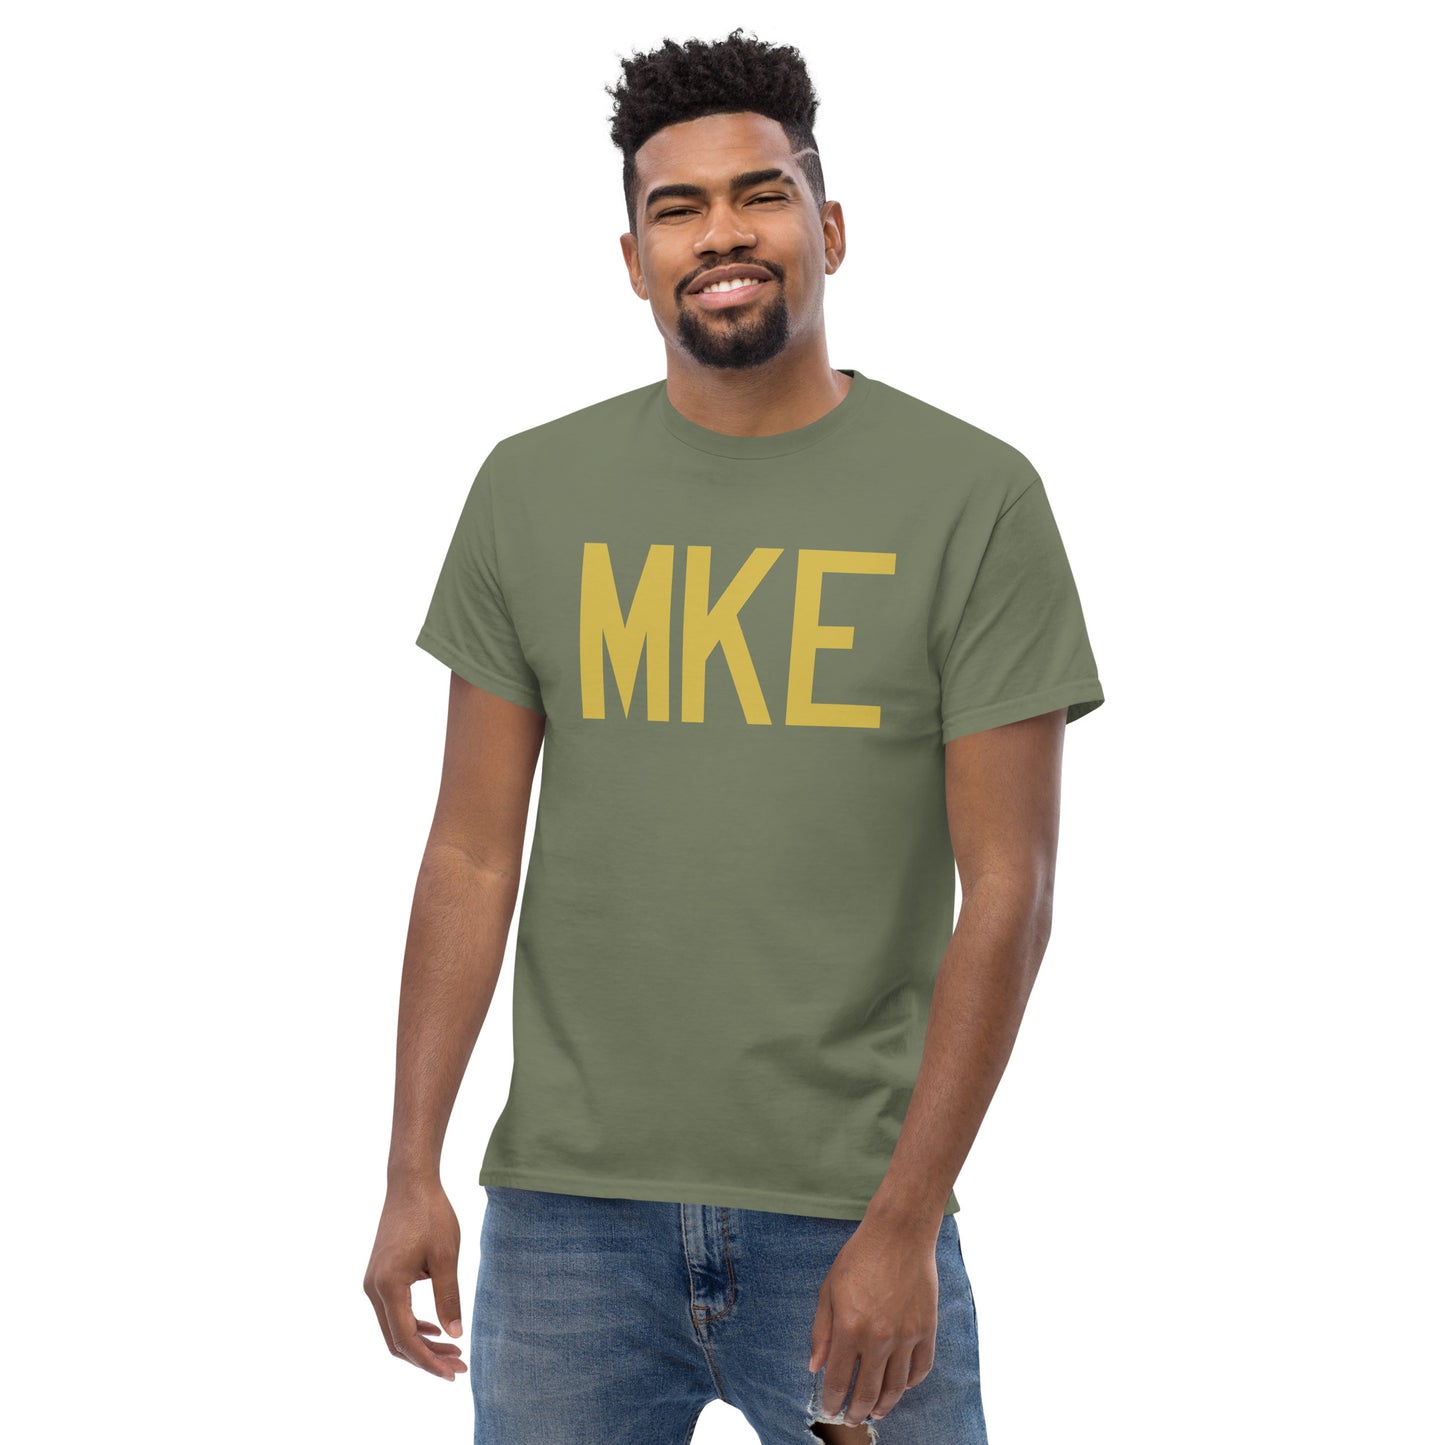 Aviation Enthusiast Men's Tee - Old Gold Graphic • MKE Milwaukee • YHM Designs - Image 06